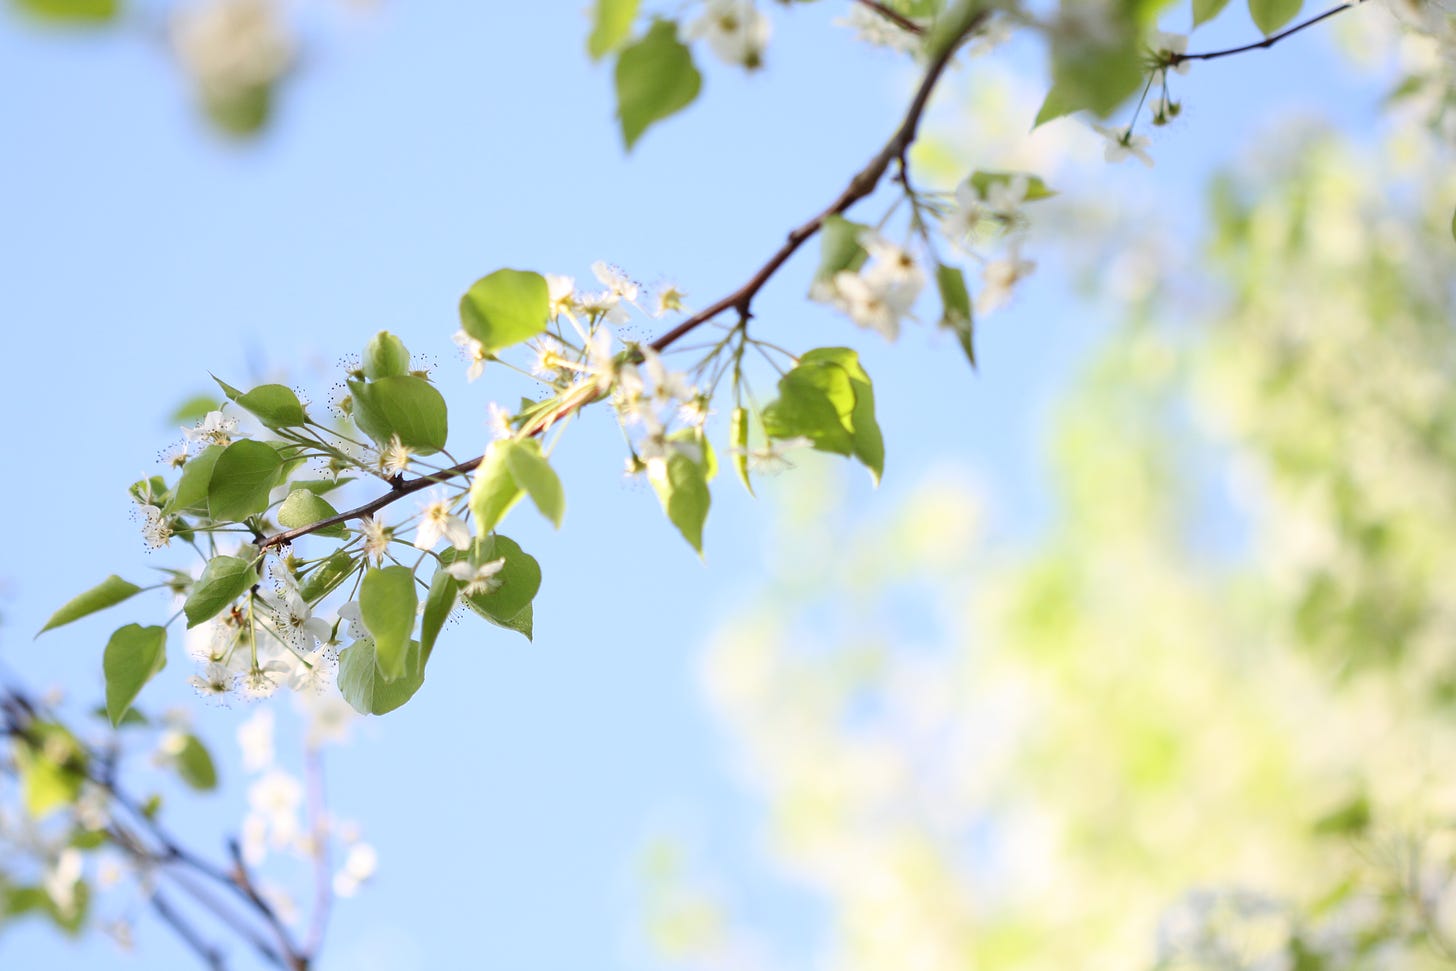 a branch blooming with white flowers against a blue sky